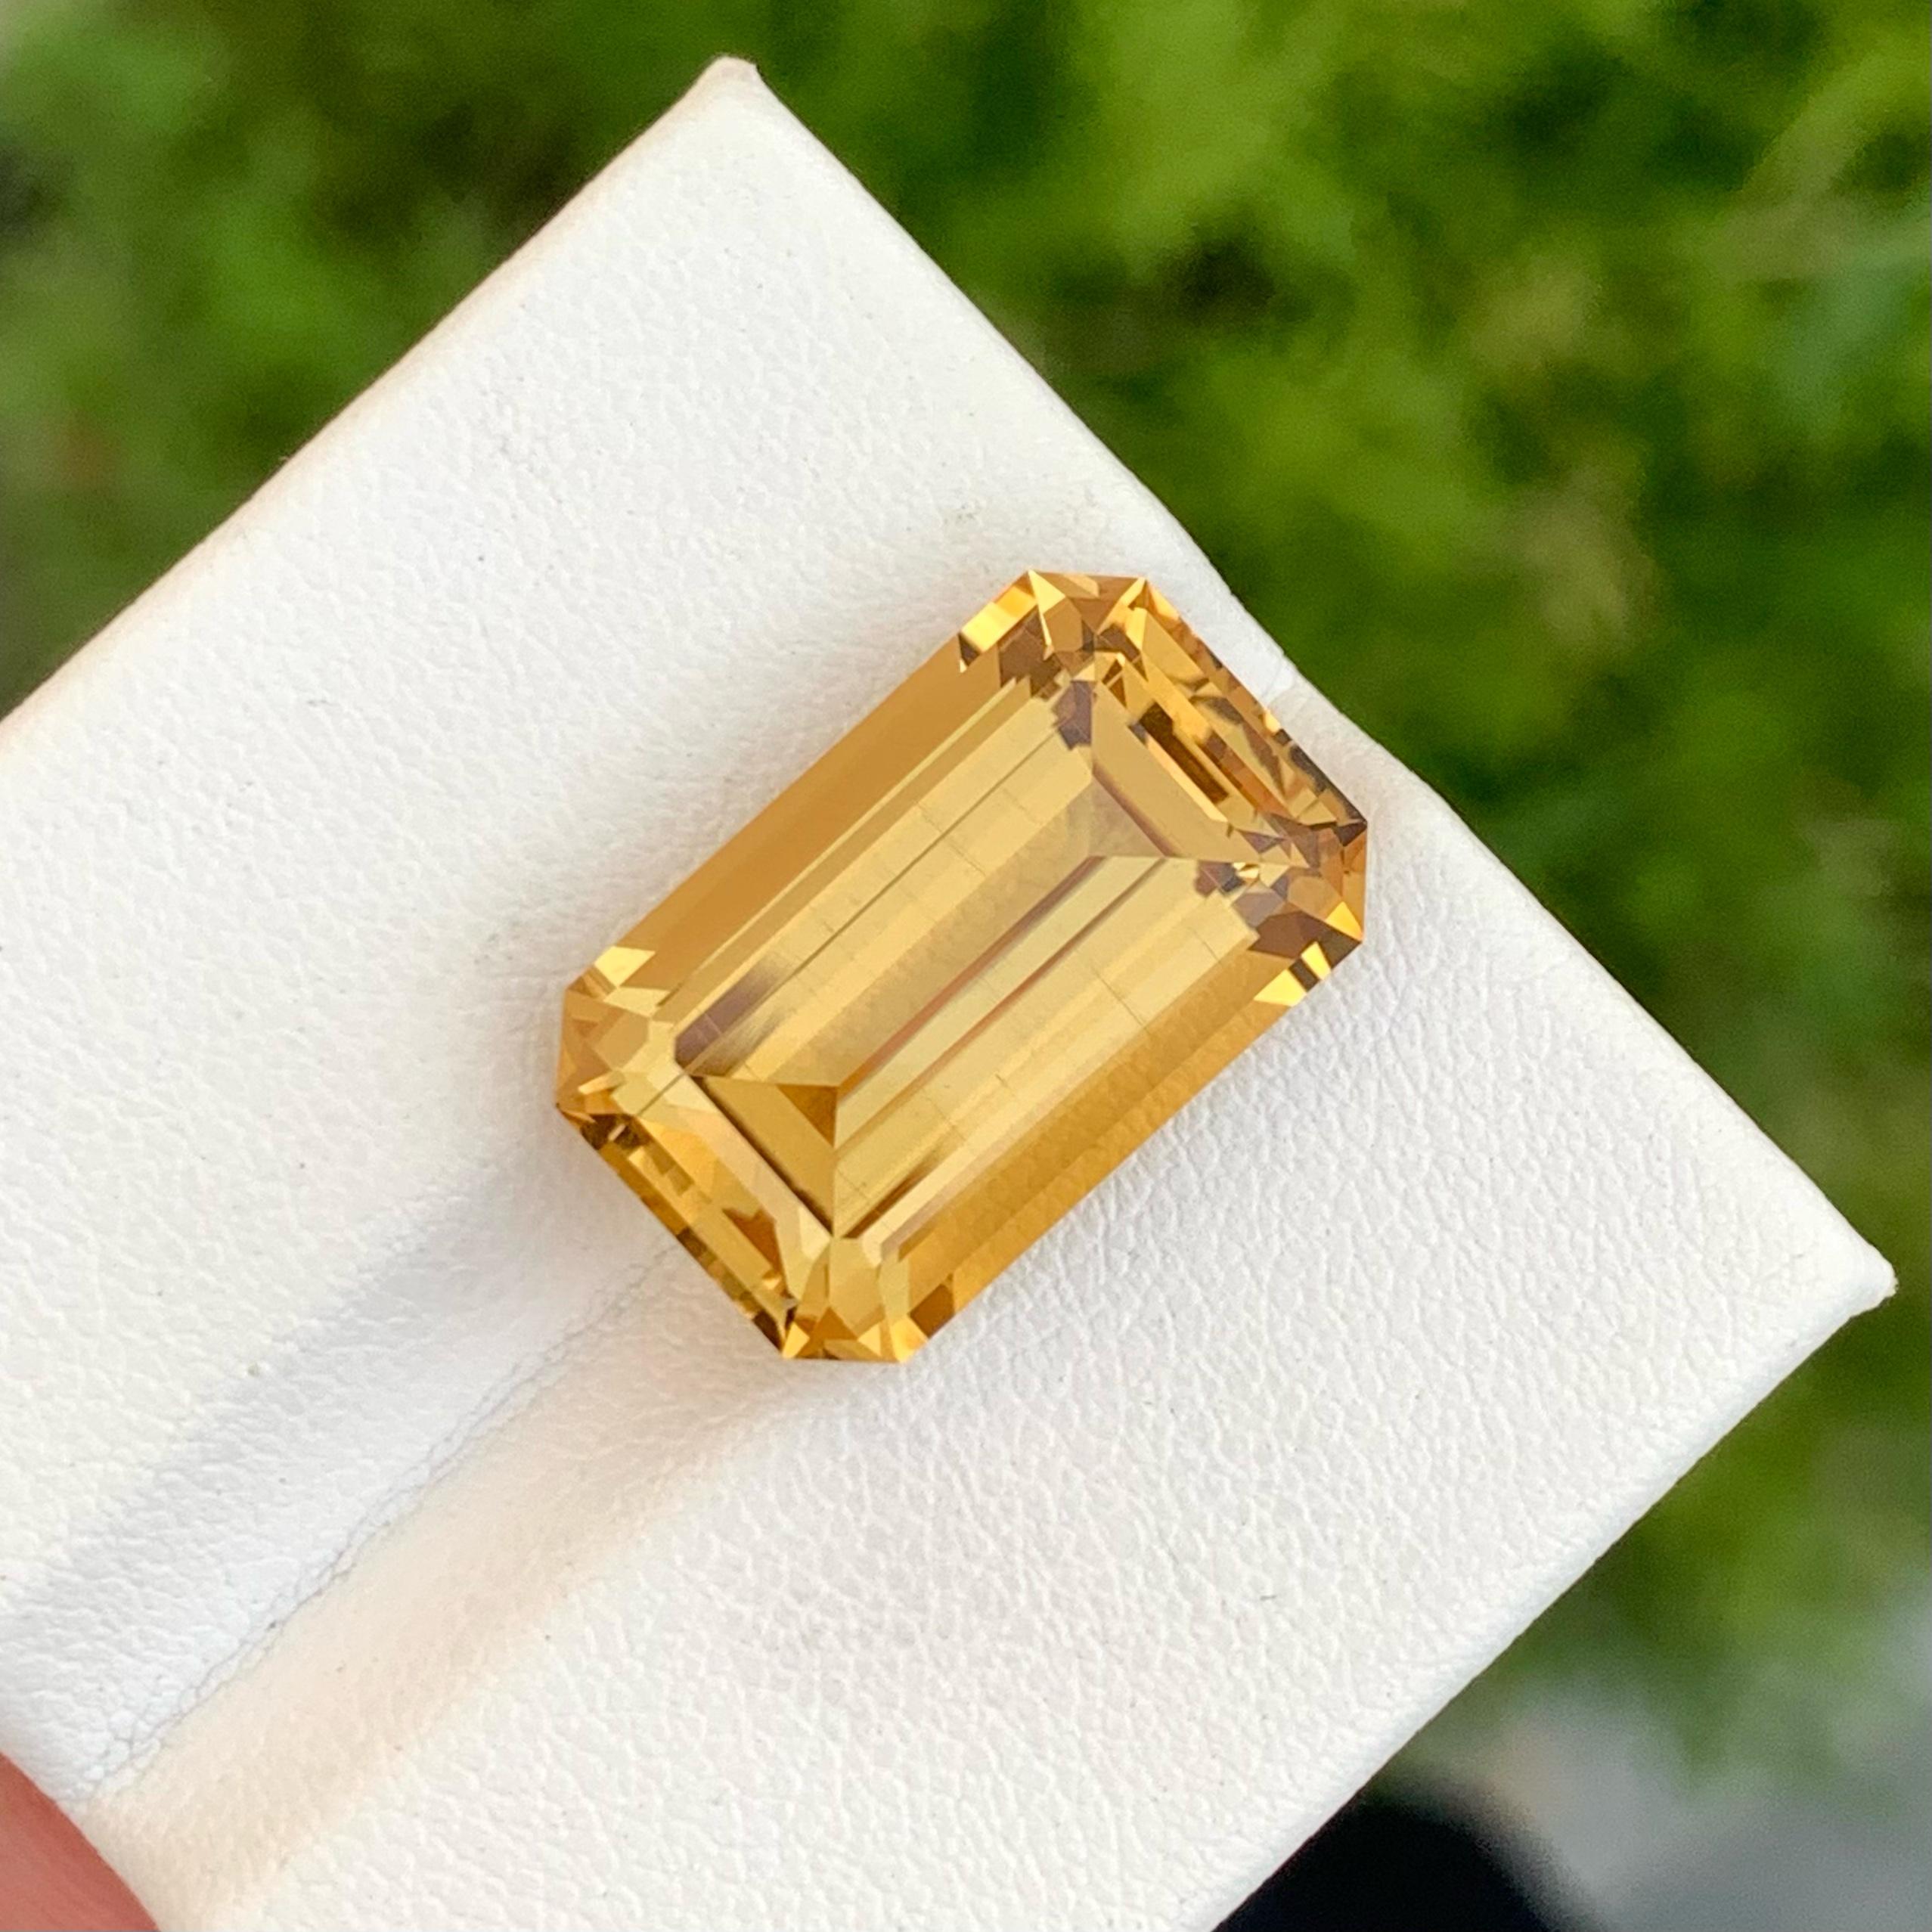 Weight 15.05 carats 
Dimensions 19.1x12.1x8.8mm
Treatment none 
Origin Brazil 
Clarity VVS (Very, Very Slightly Included)
Shape Octagon 
Cut Emerald


Unleash your inner radiance with the divine fire of our Heliodore gemstone. Its fiery golden tones